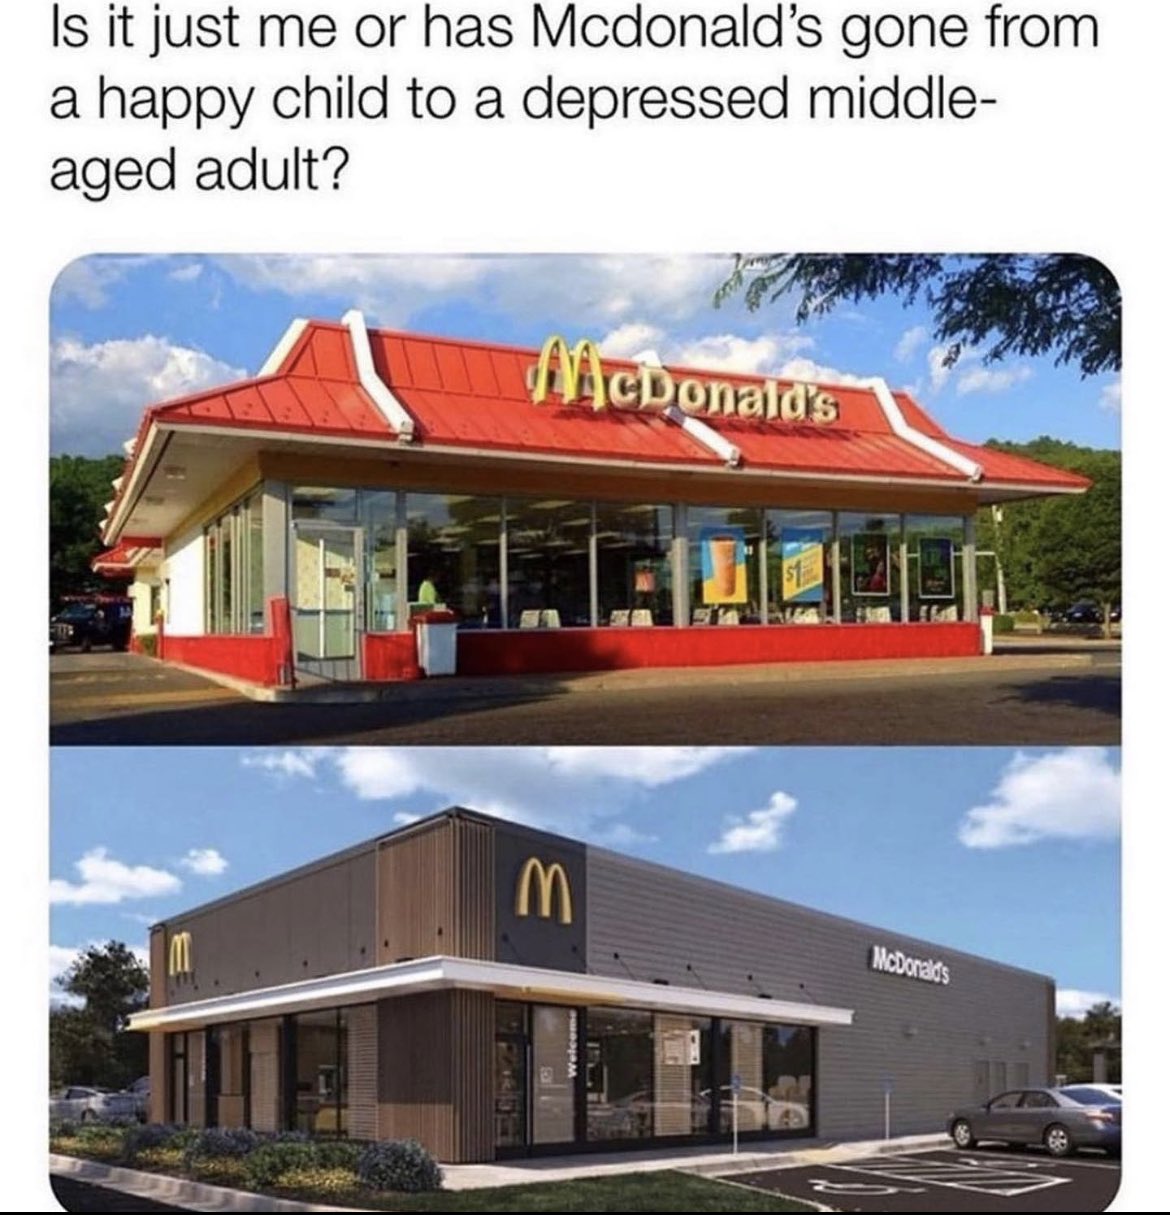 internet hall of  fame - mcdonald's went from a happy child - Is it just me or has Mcdonald's gone from a happy child to a depressed middle aged adult? McDonald's E N McDonald's